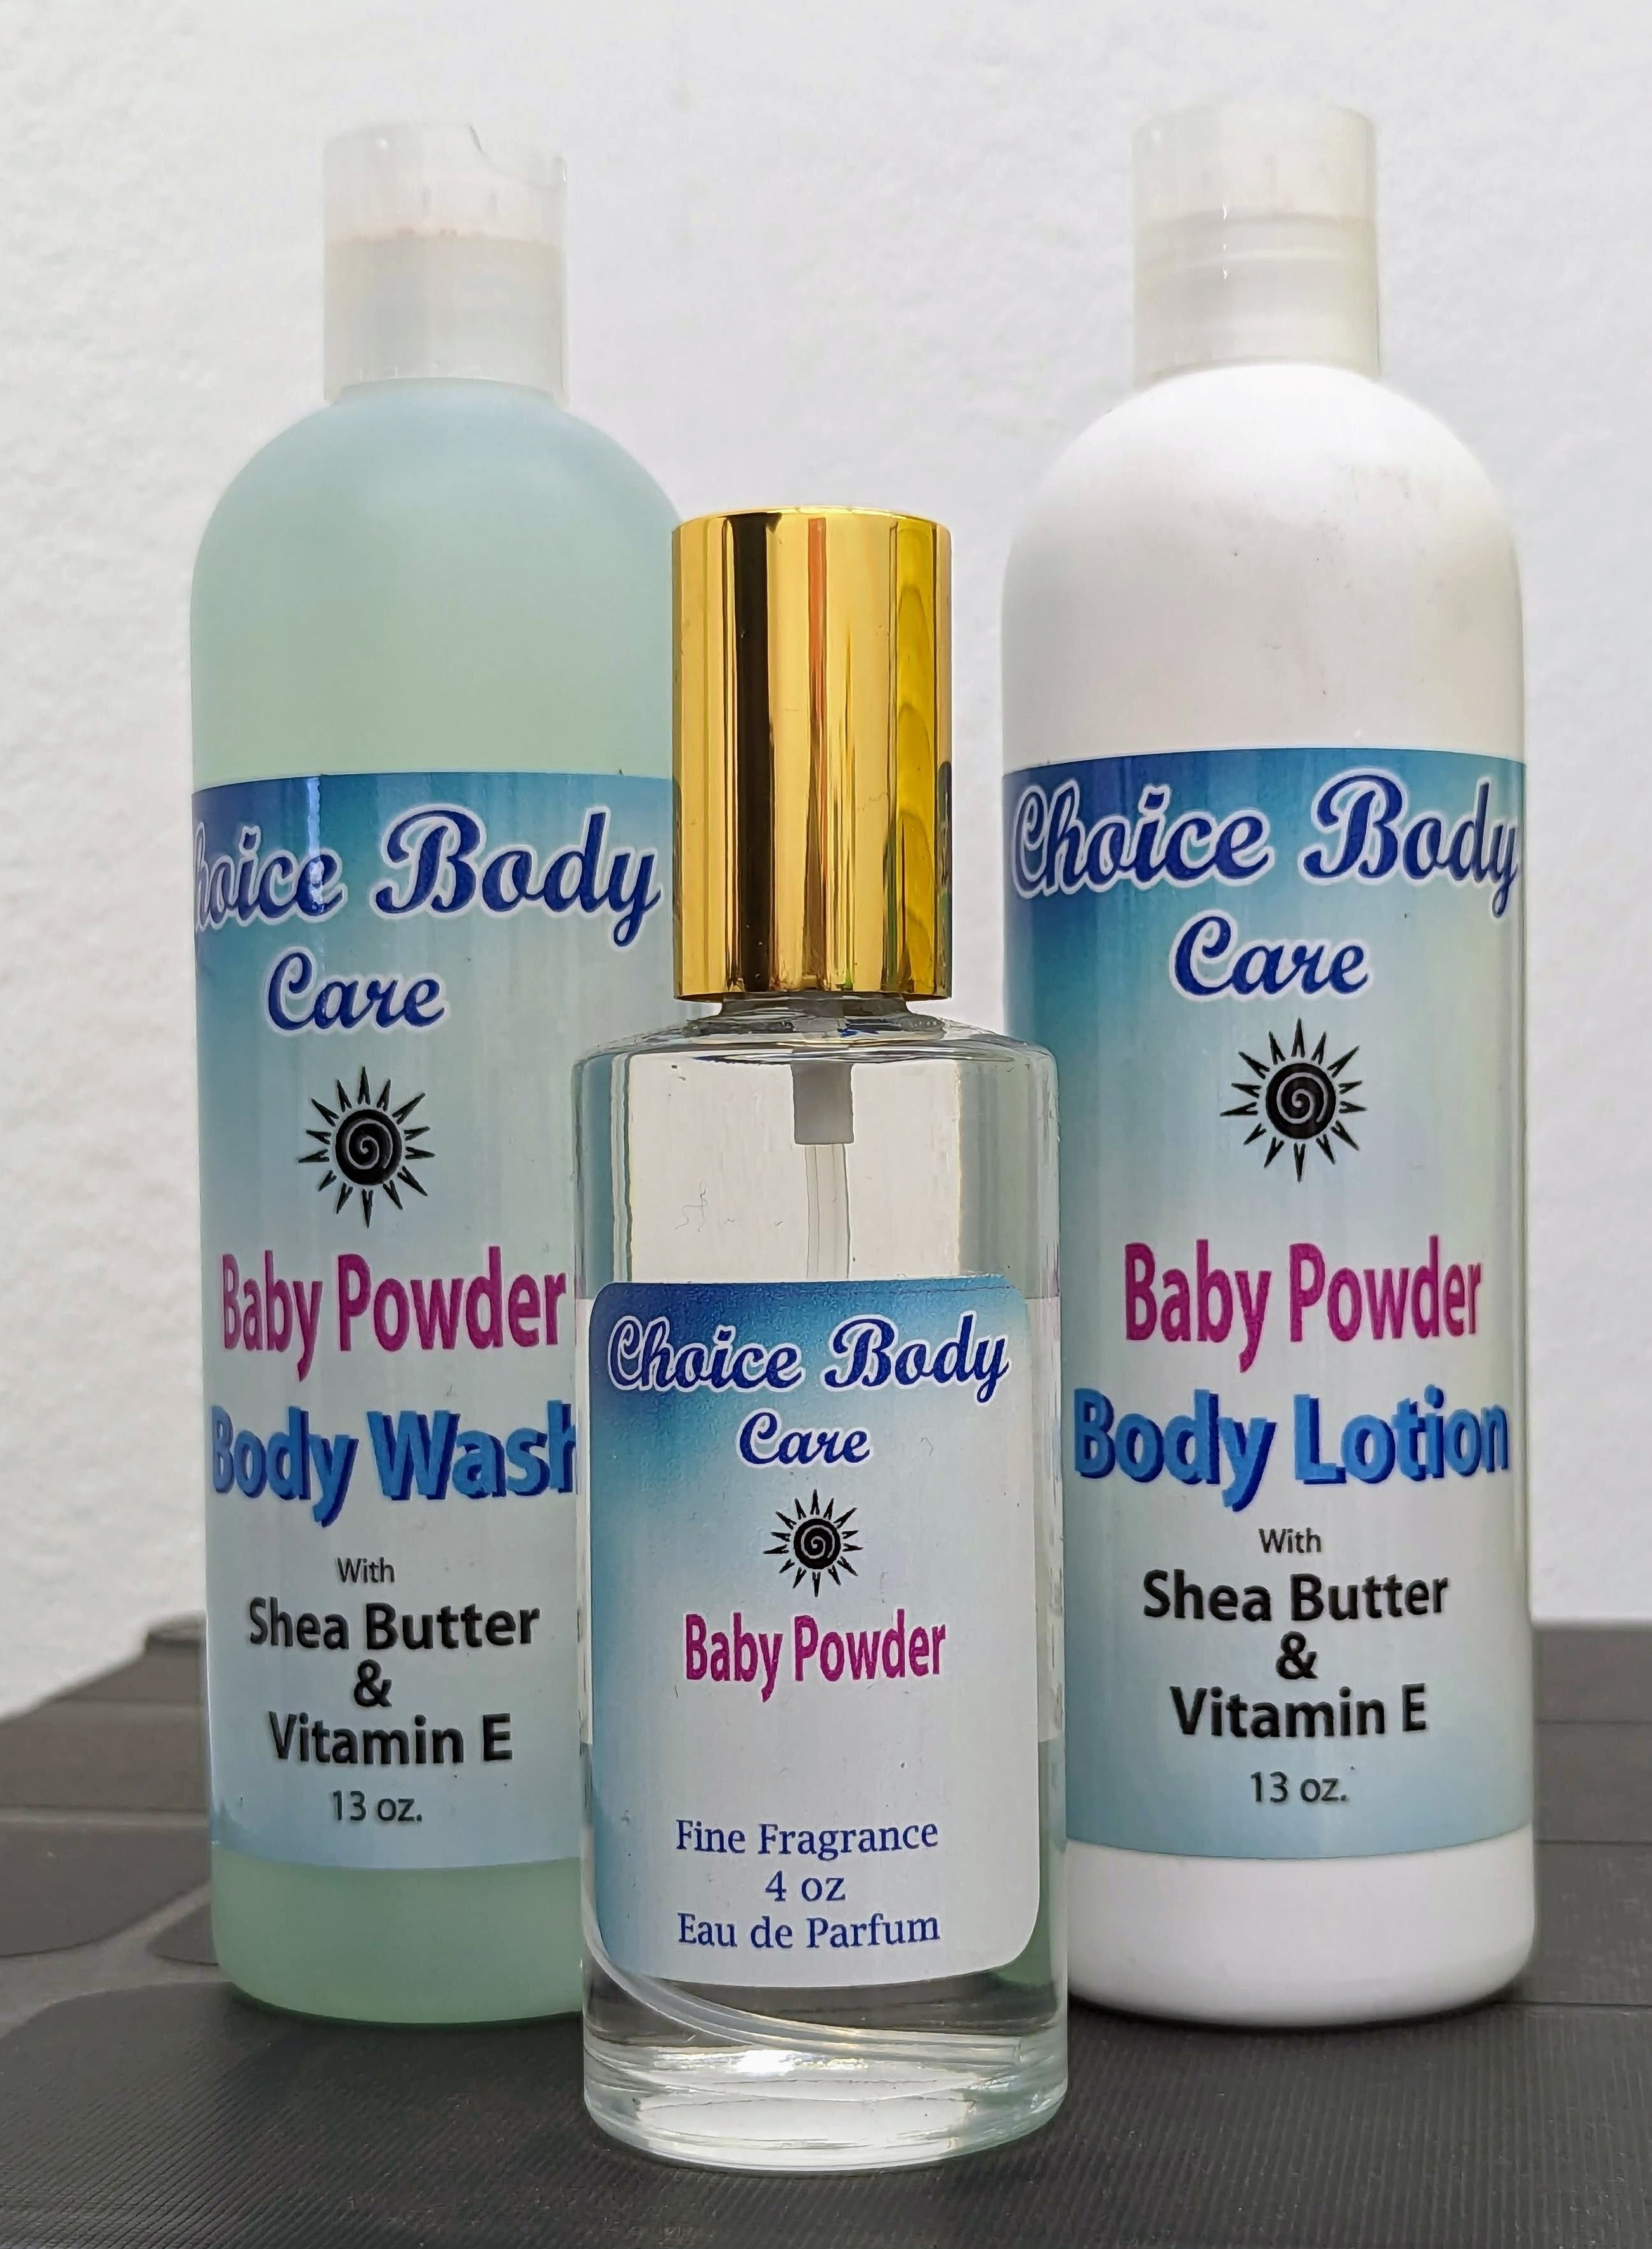 EBE56 Baby Powder perfume, body oil, unisex fragrance concentrated